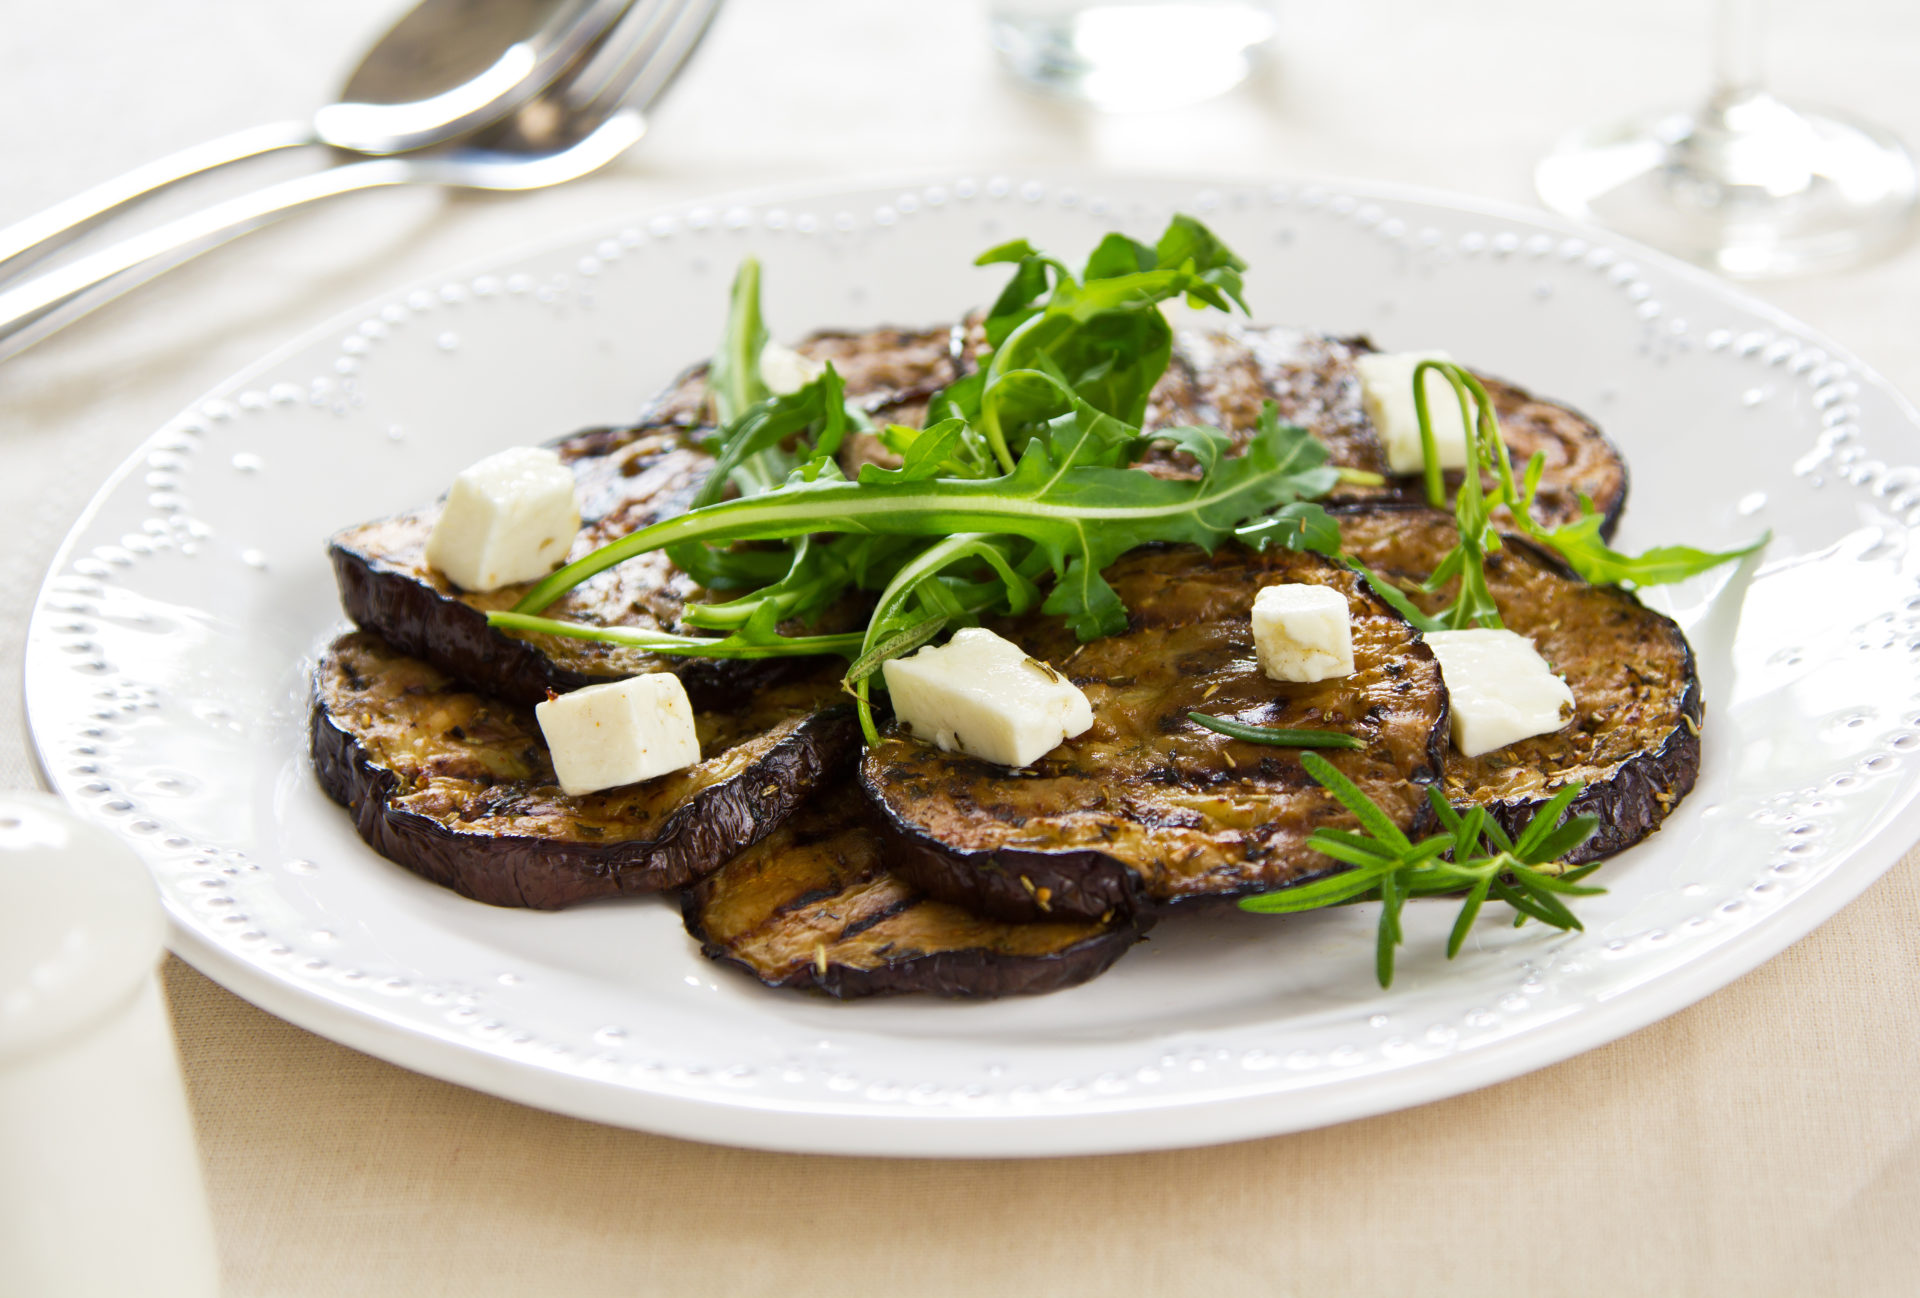 Grilled Aubergine with Feta and Rocket salad